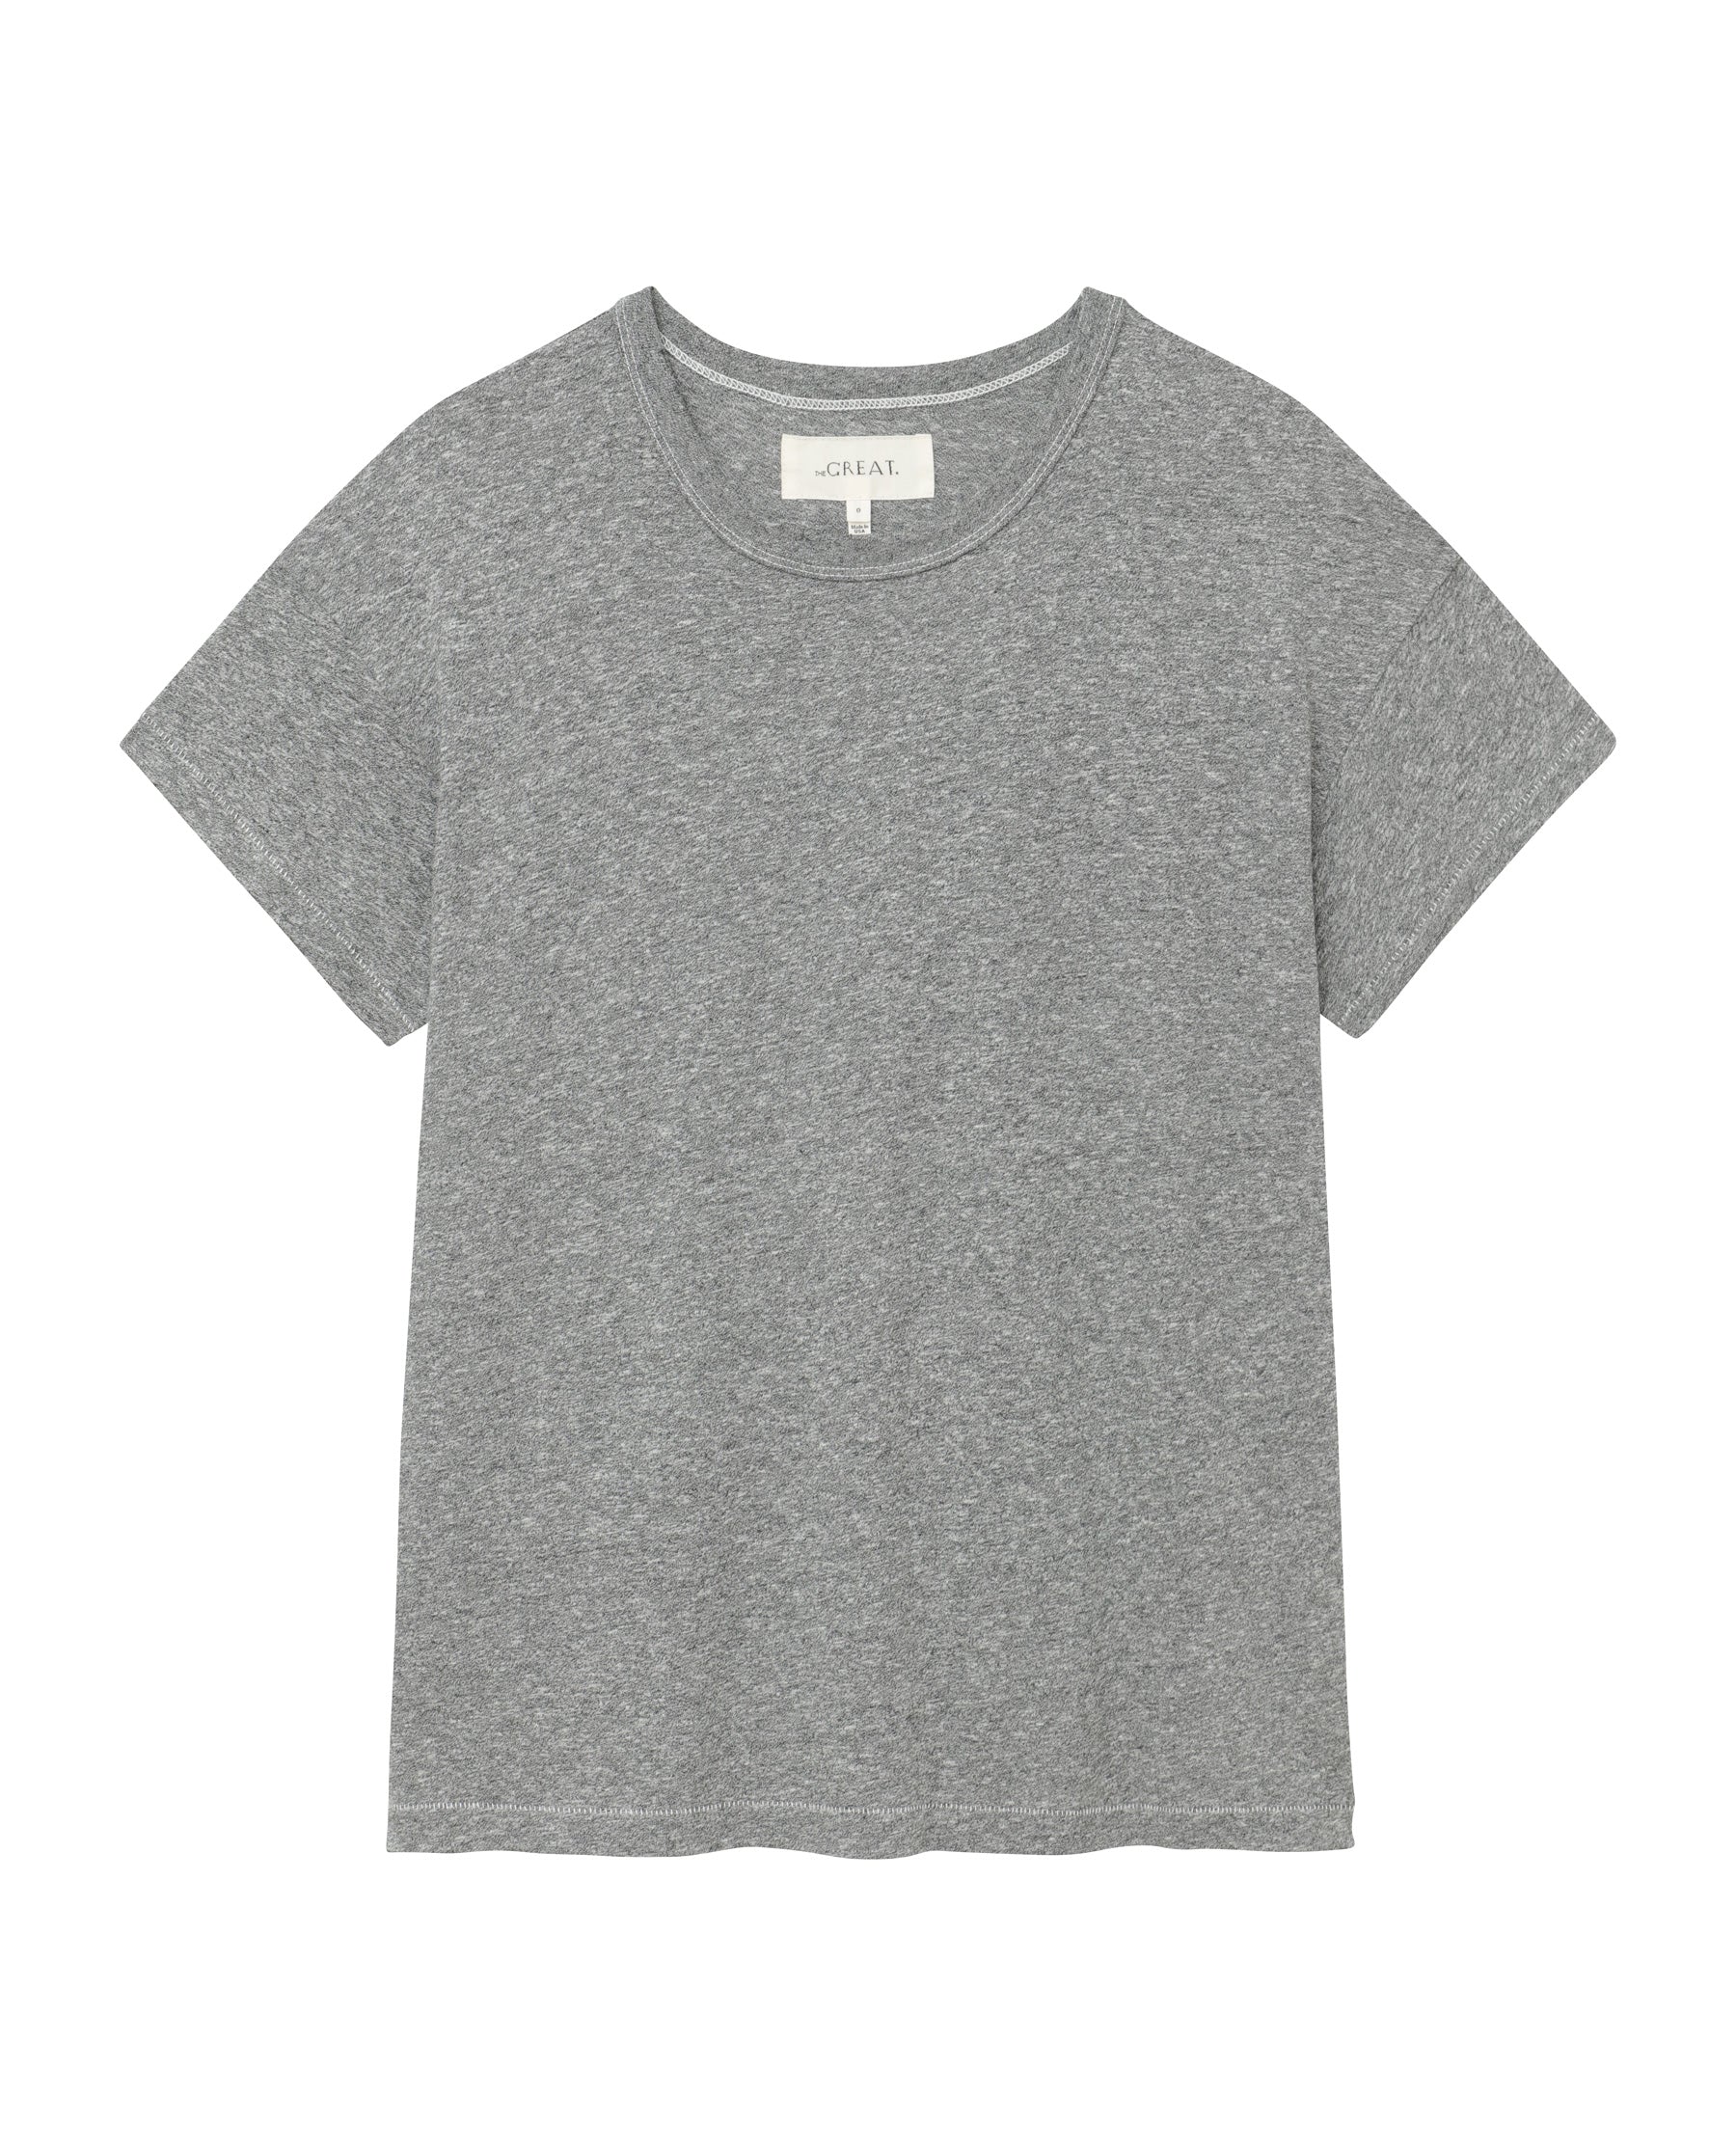 The Boxy Crew. Solid -- Heather Grey